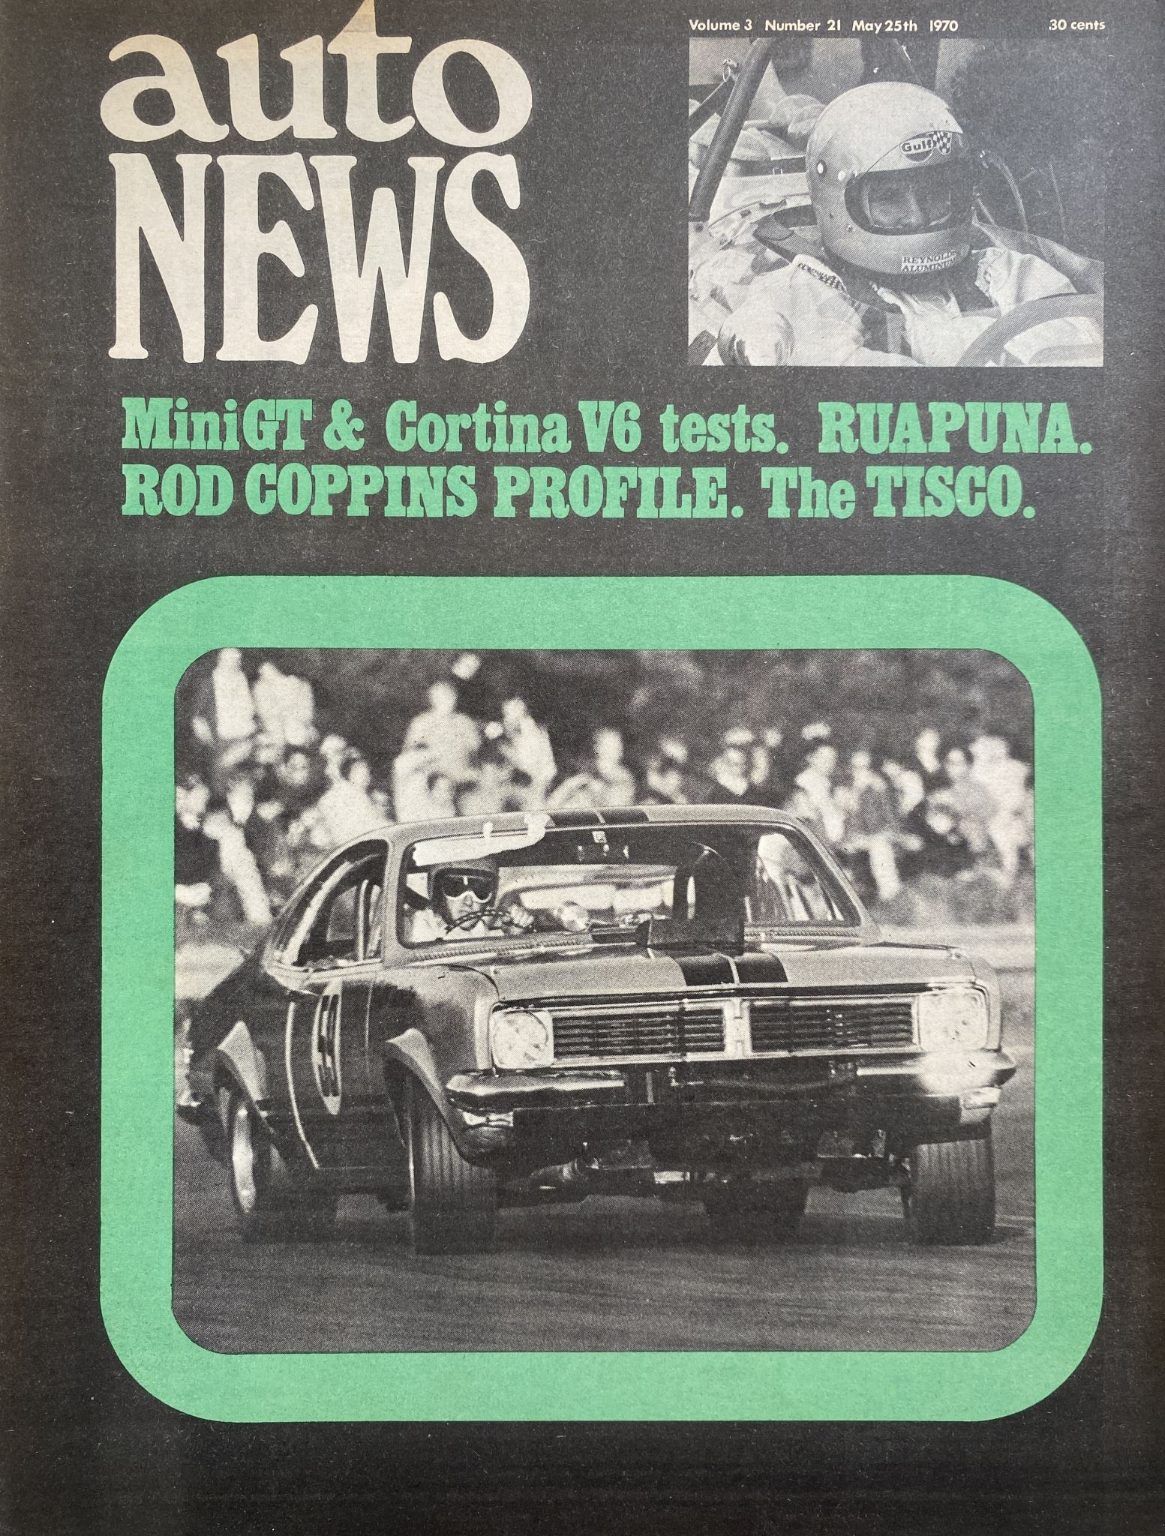 OLD MAGAZINE: Auto News - Vol. 3, Number 21, 25th May 1970